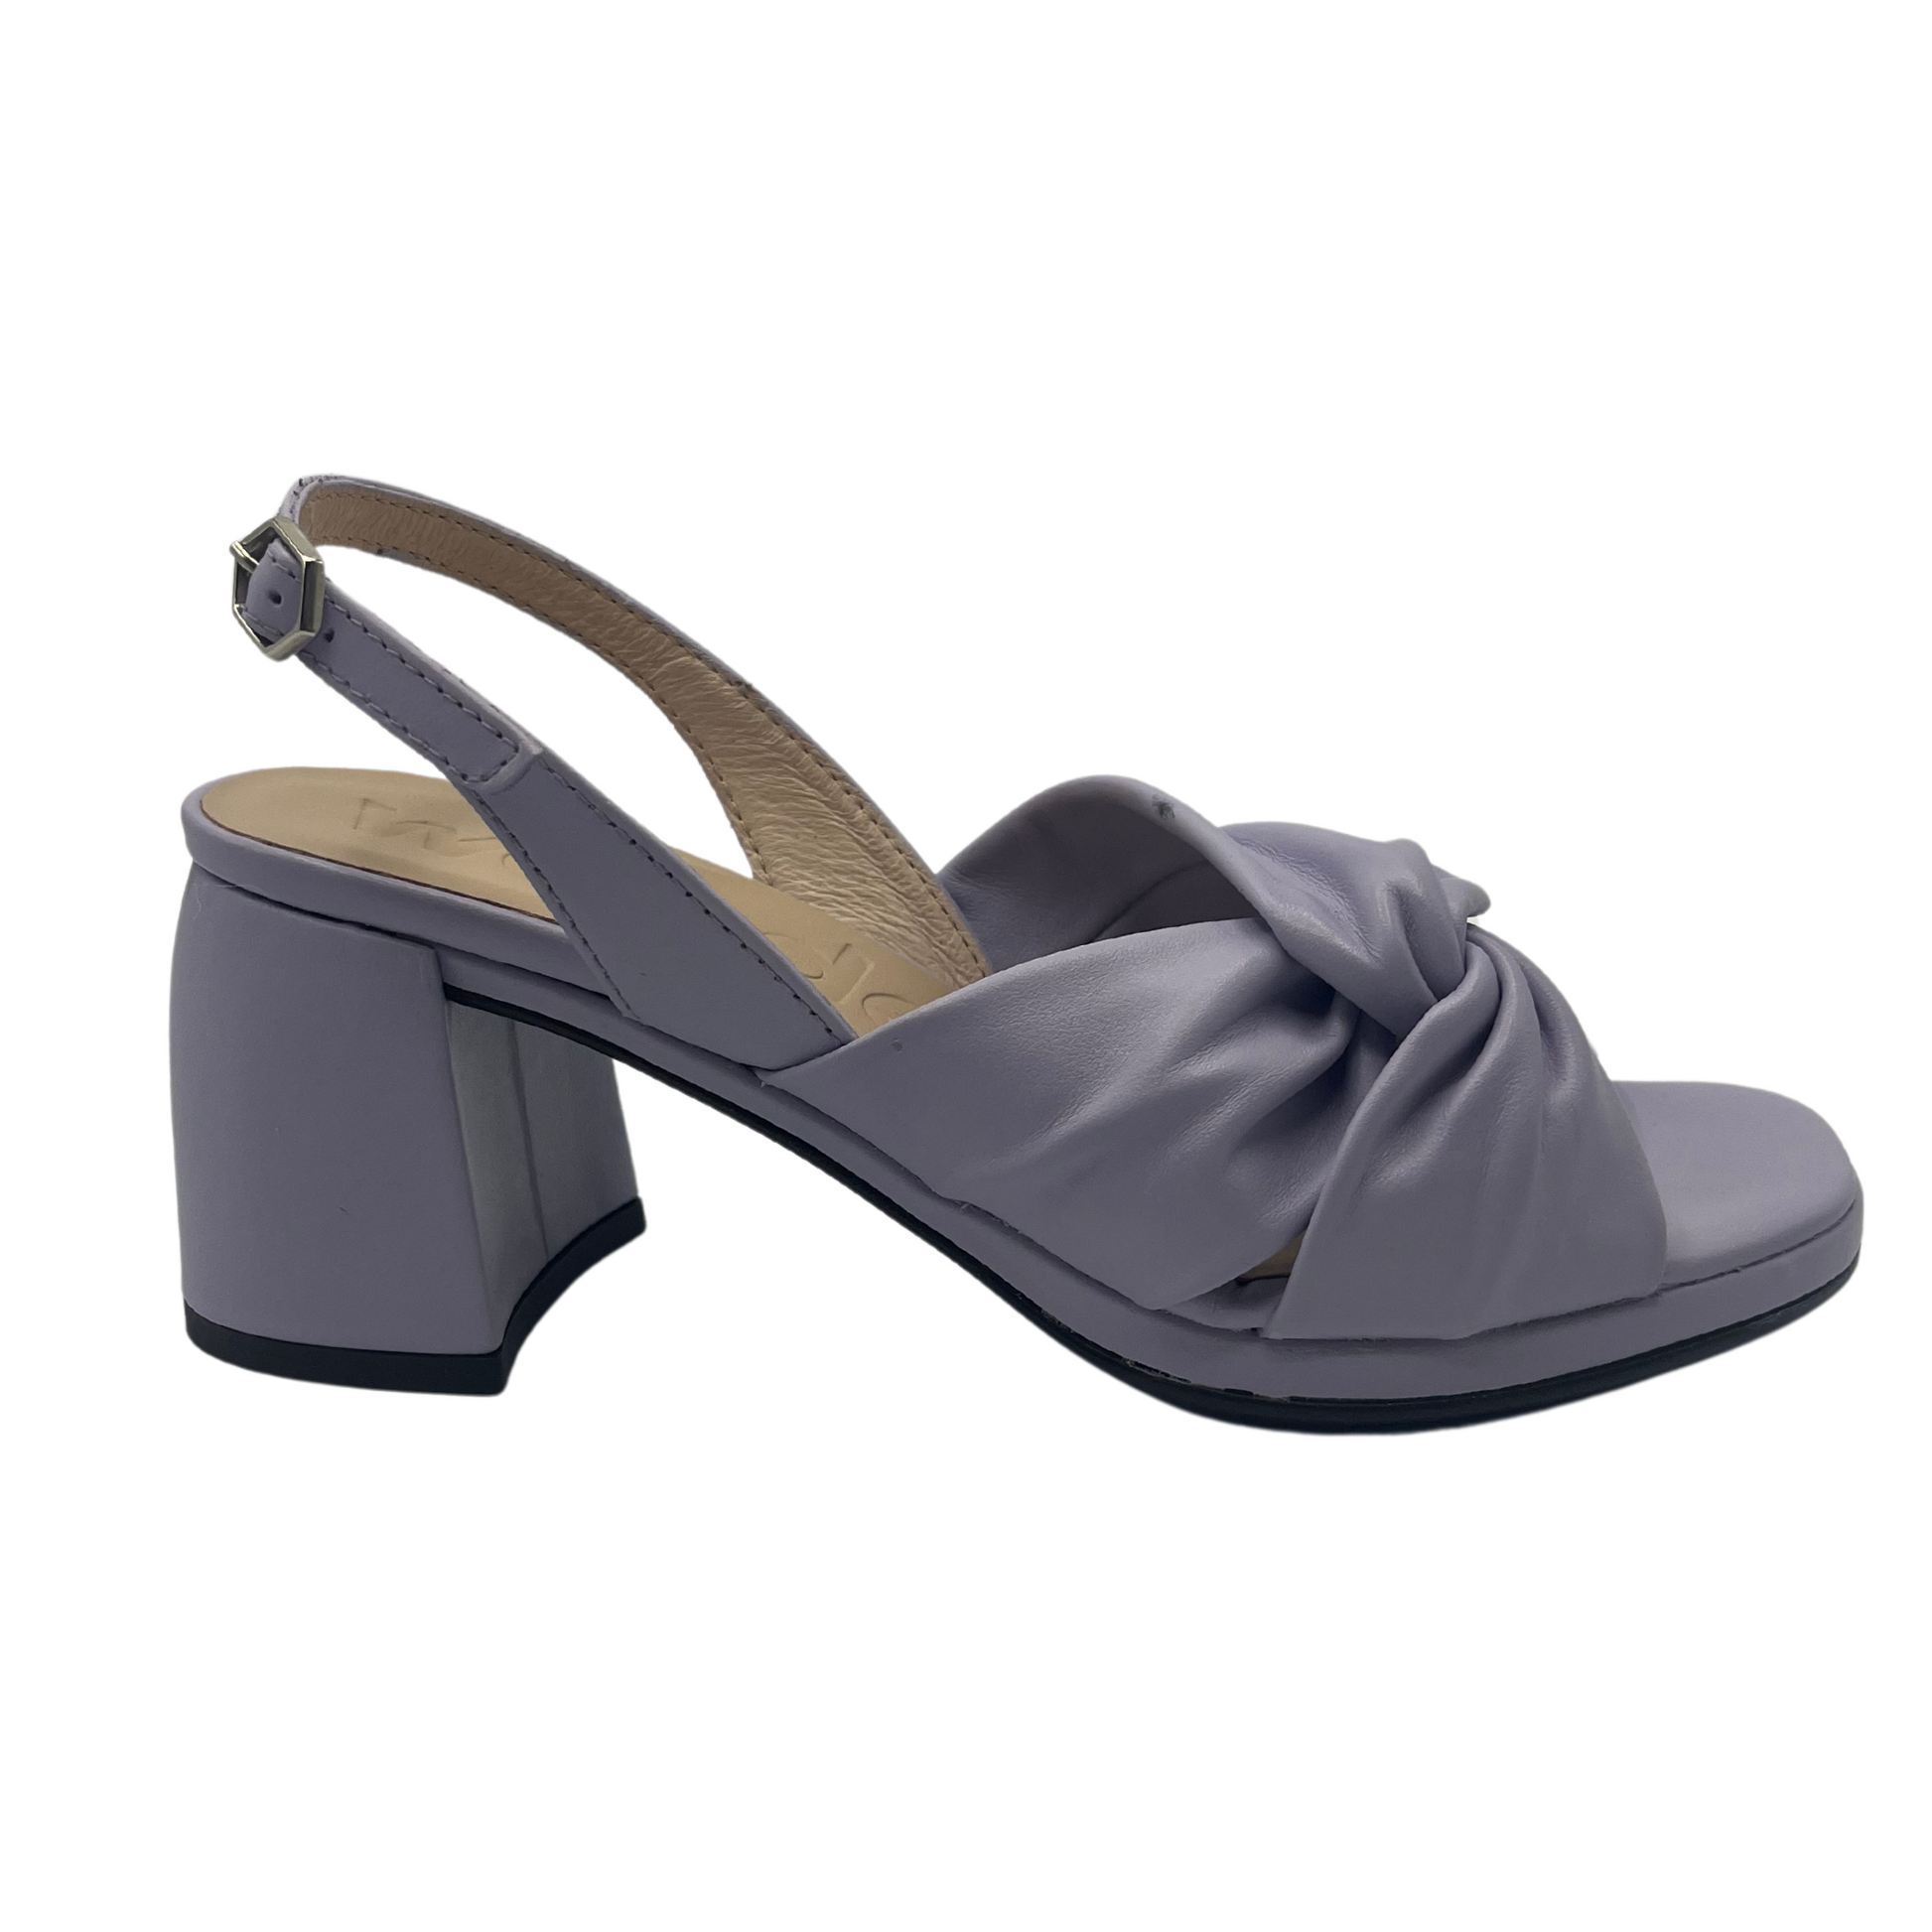 Right facing view of lavender sandal with block heel and buckle strap